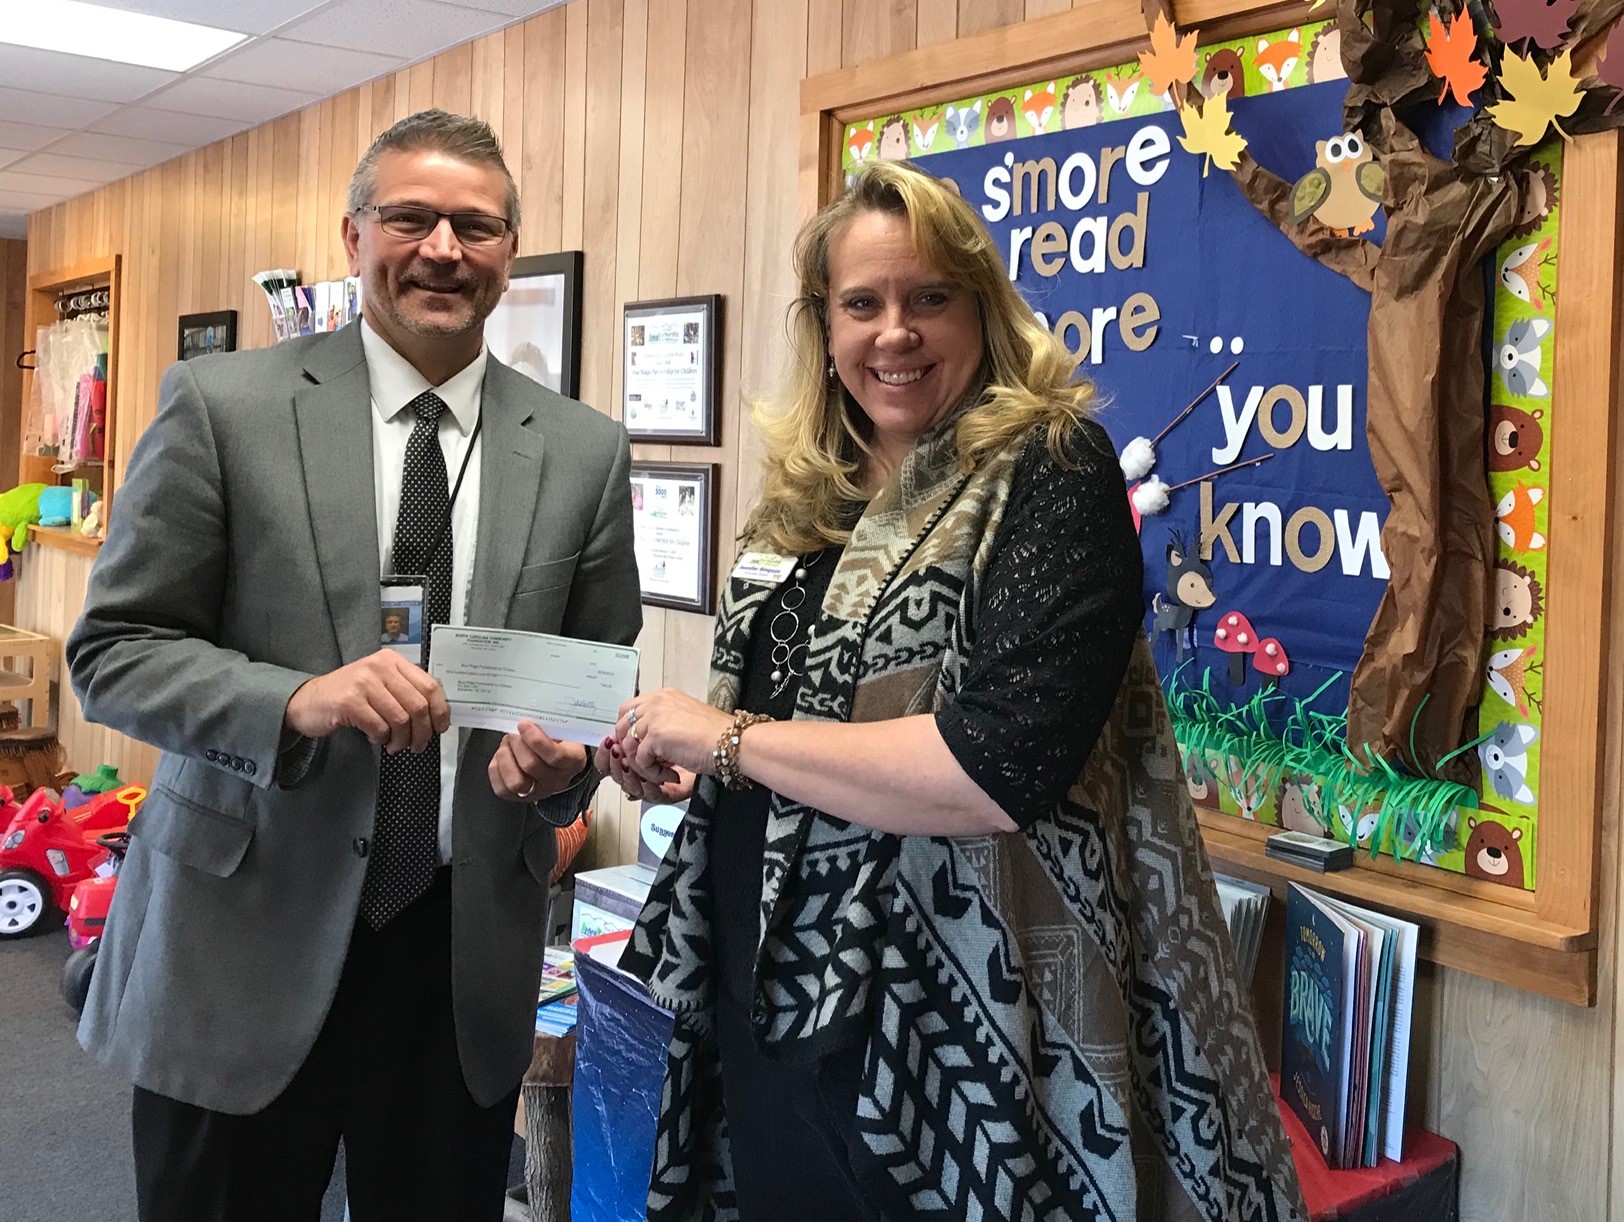 Pictured (left) is Ellis Ayers, ACF board member, presenting a grant award to Jennifer Simpson, executive director of the Blue Ridge Partnership for Children.